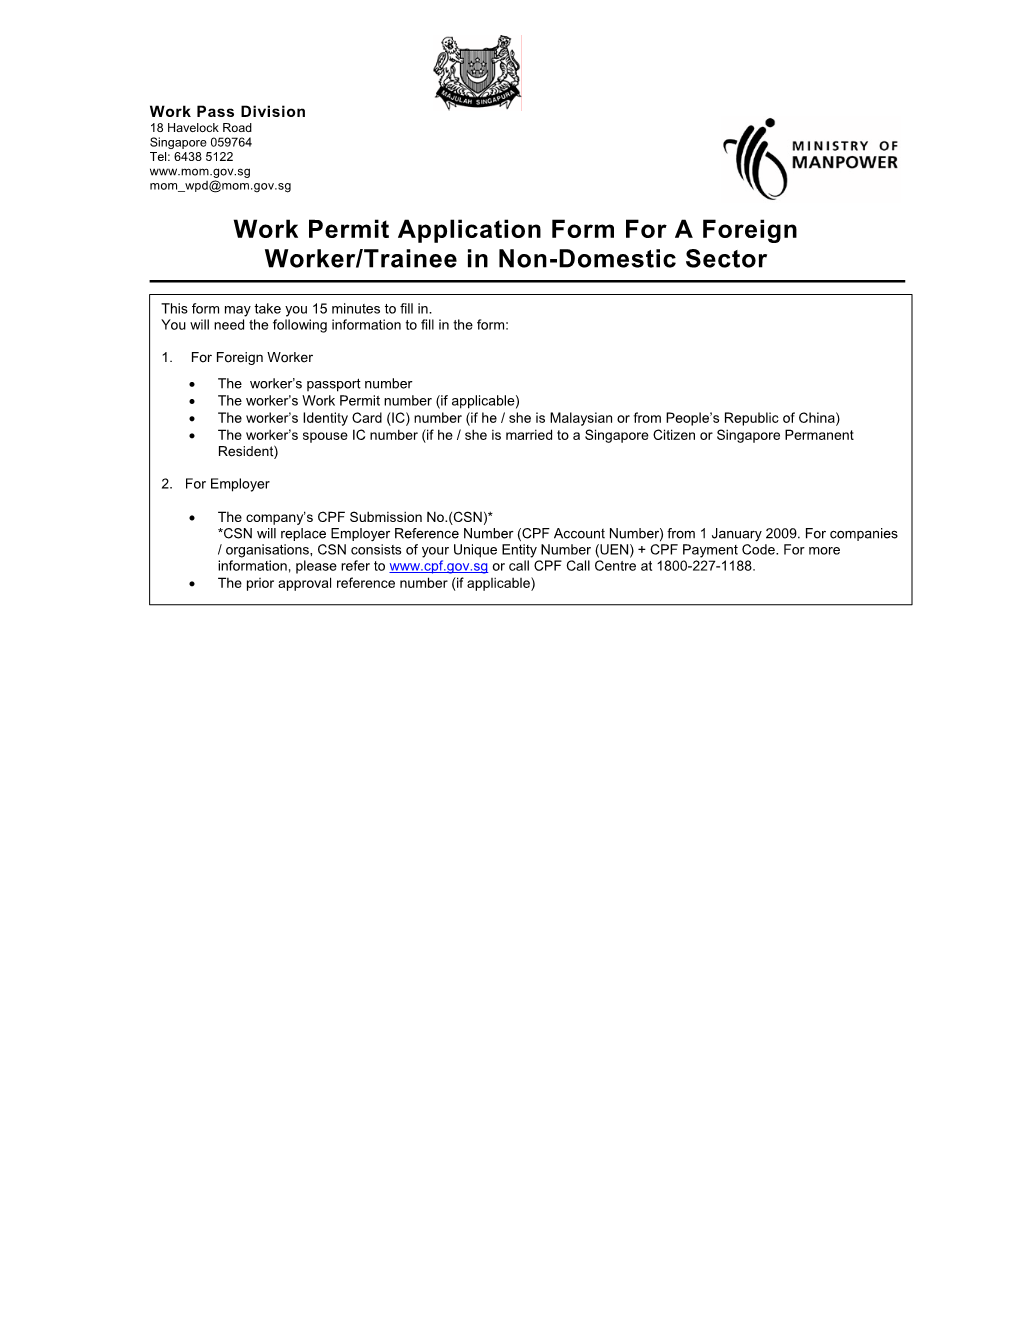 Work Permit Application Form for a Foreign Worker/Trainee in Non-Domestic Sector